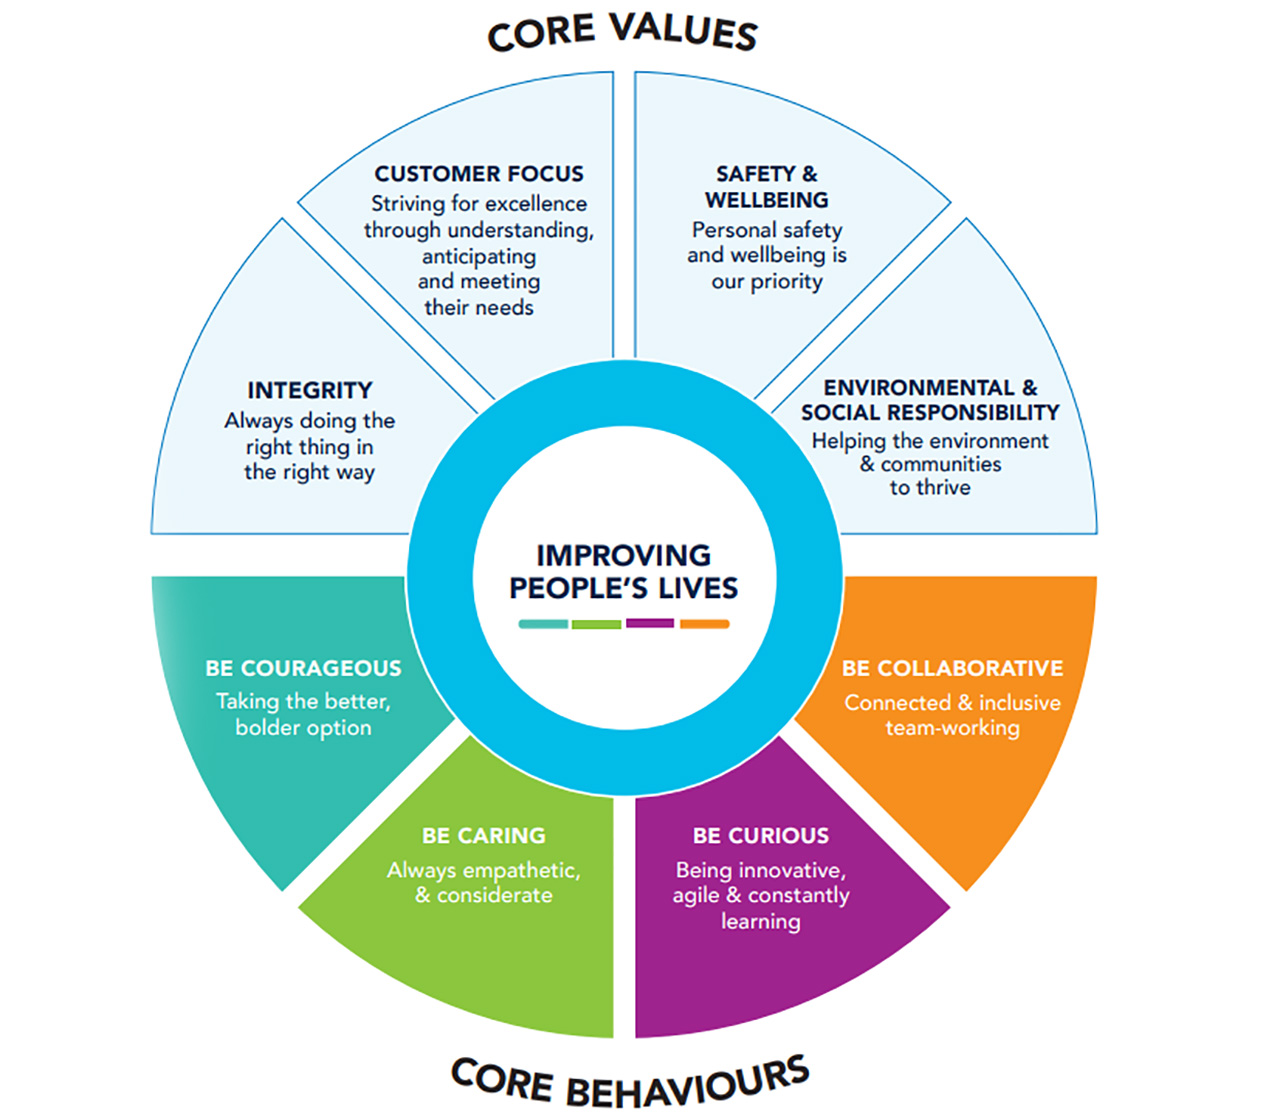 Costain values and behaviours